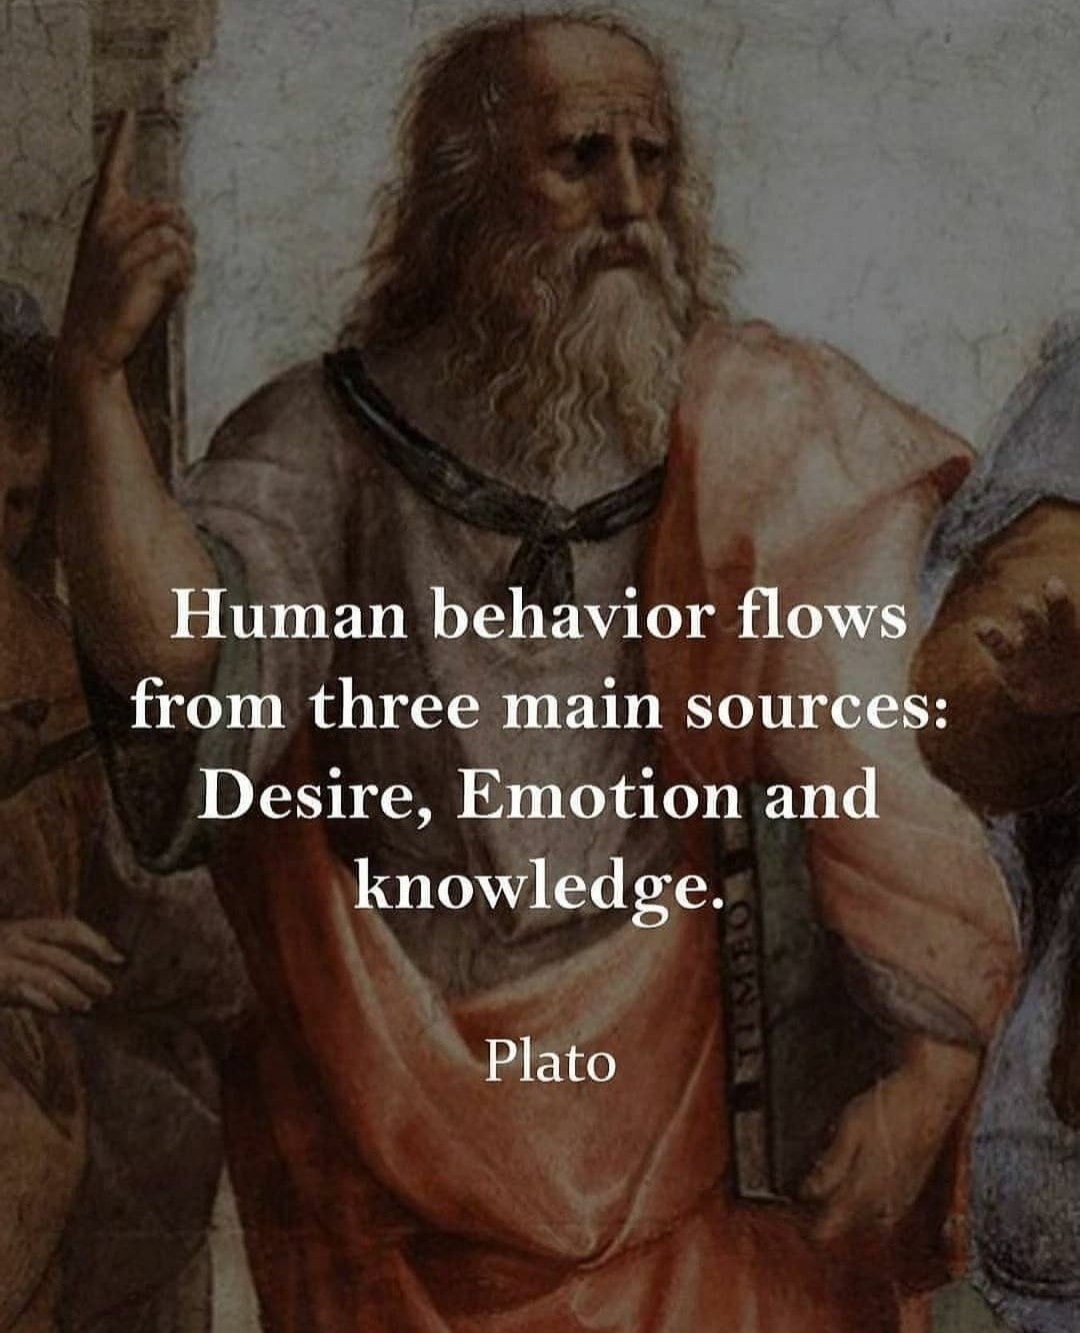 Human behavior flows from three main sources: desire, emotion, and knowledge. Plato